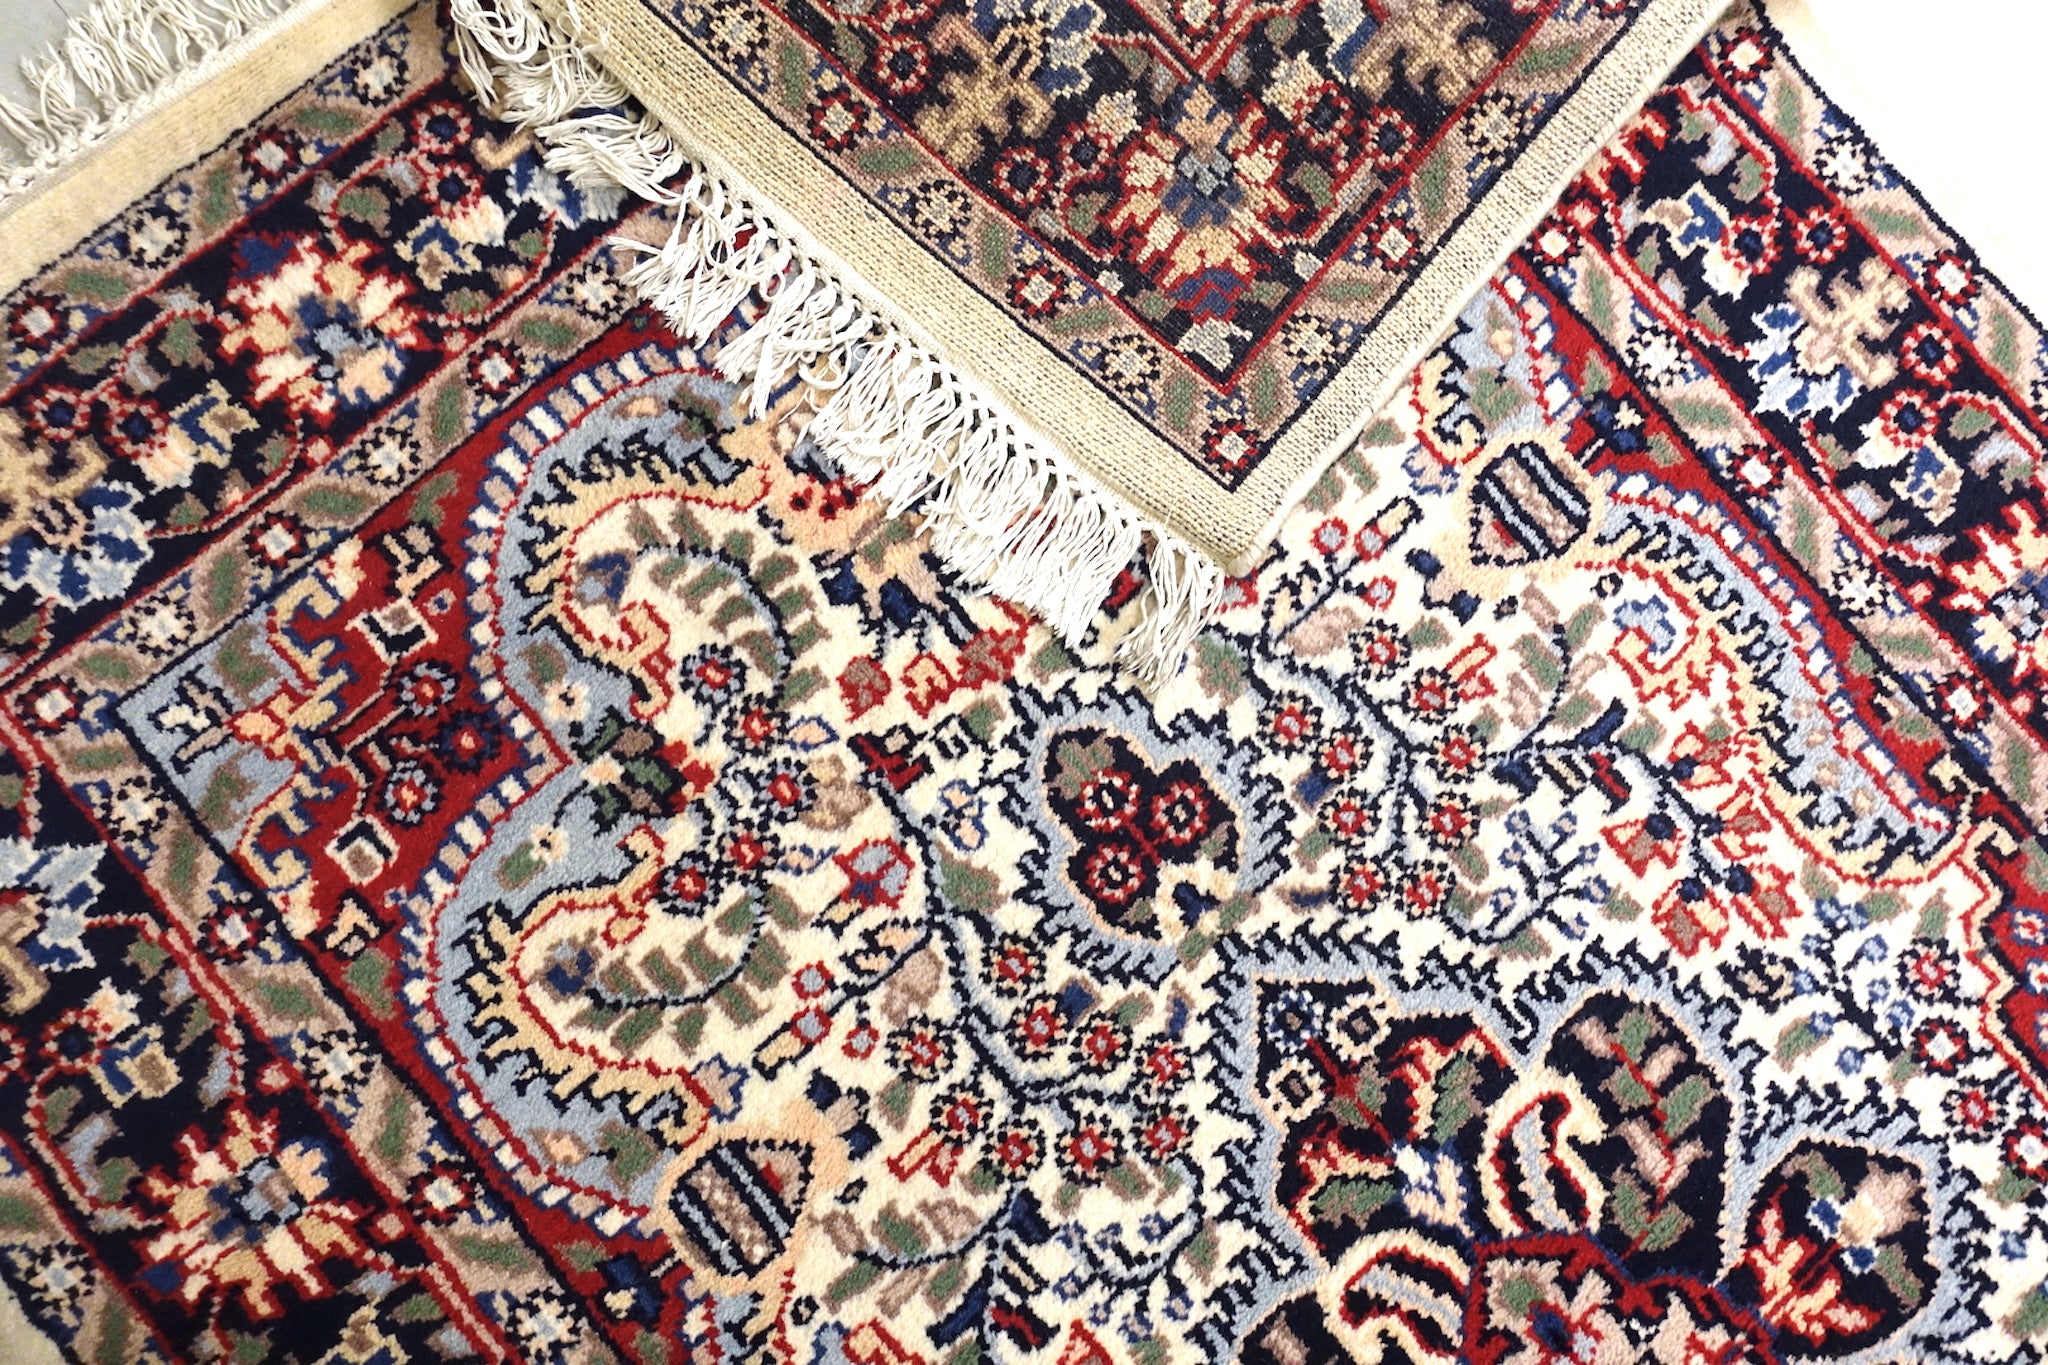 The rug measures 4 feet by 6 feet and is wool rug from central India. The colours used on the rug are beige,camel,blue and red.